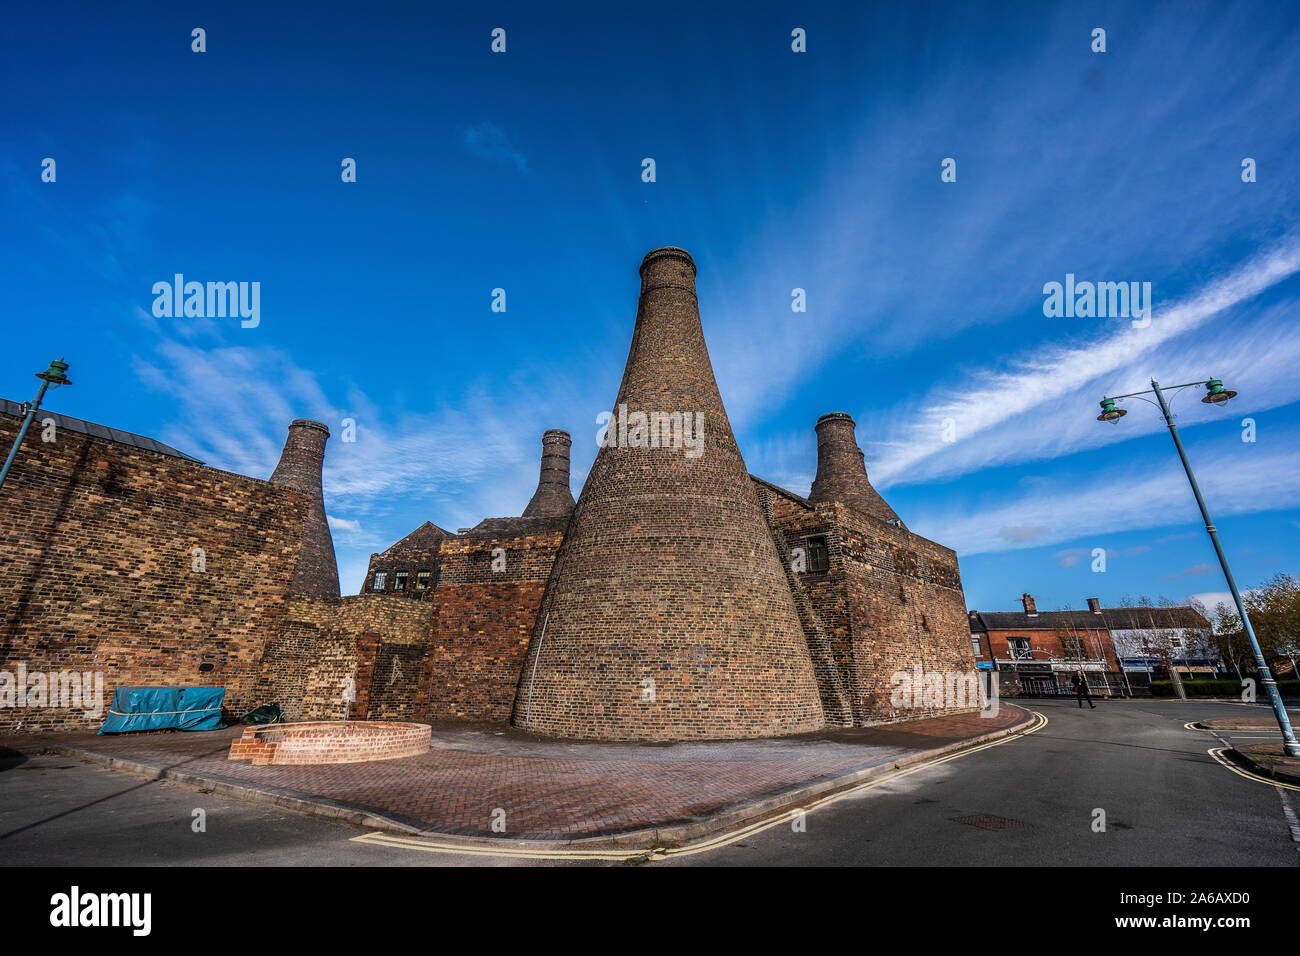 The famous bottle kilns at Gladstone Pottery Museum in Stoke on Trent, Pottery manufacturing, one of the former pottery and industry towns Stock Photo